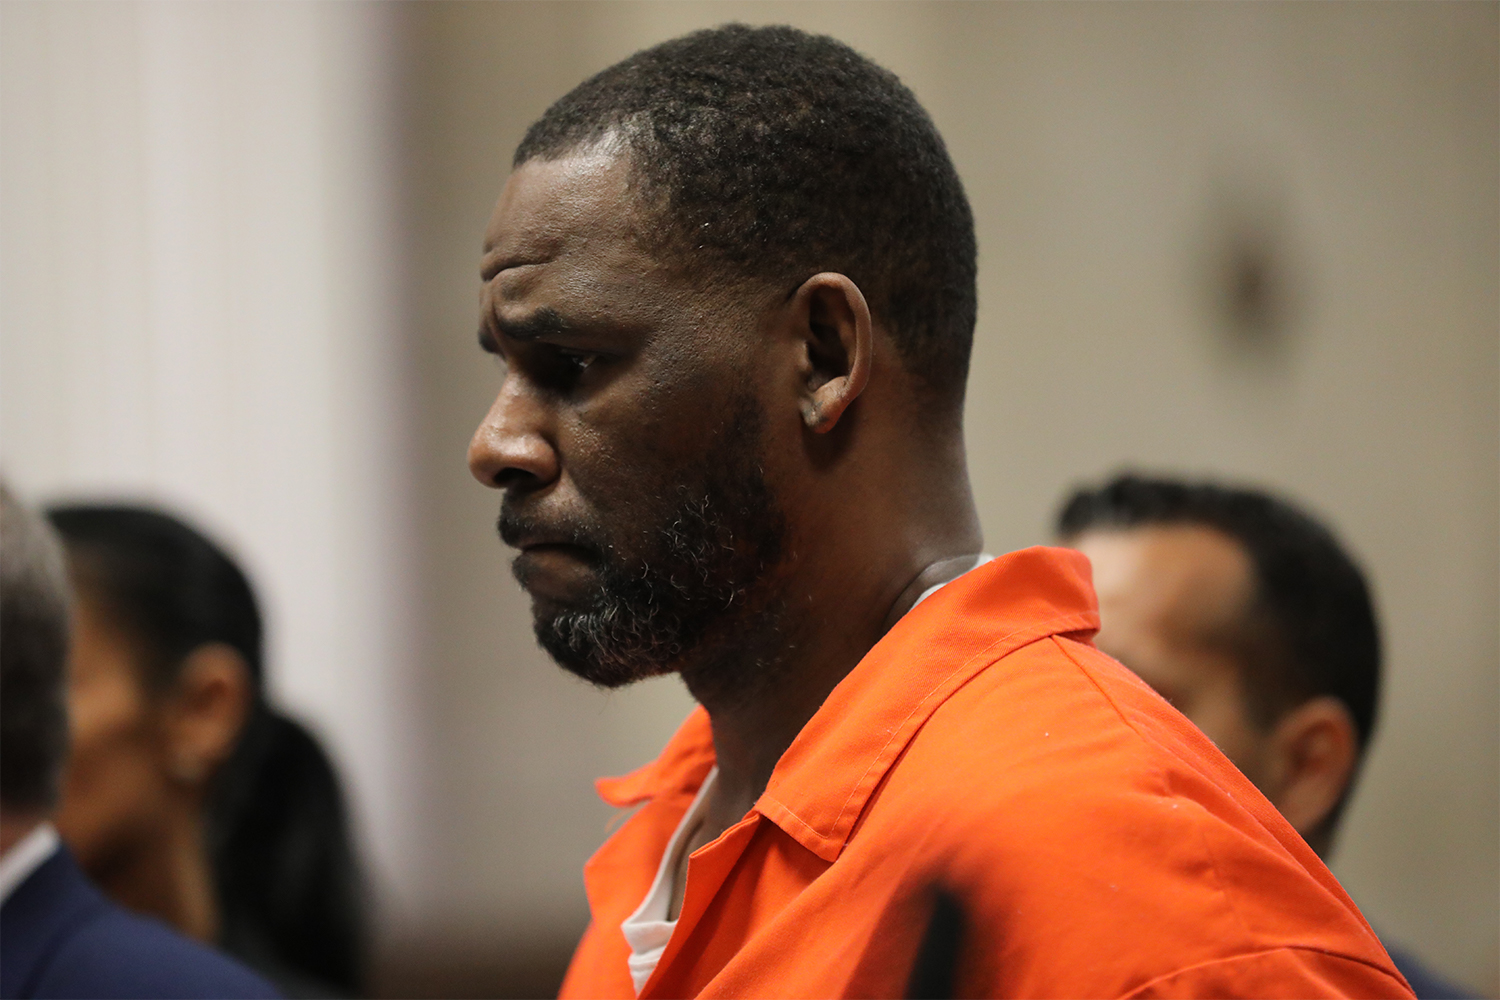 R. Kelly appears during a hearing at the Leighton Criminal Courthouse on September 17, 2019 in Chicago, Illinois. Kelly is facing multiple sexual assault charges and is being held without bail